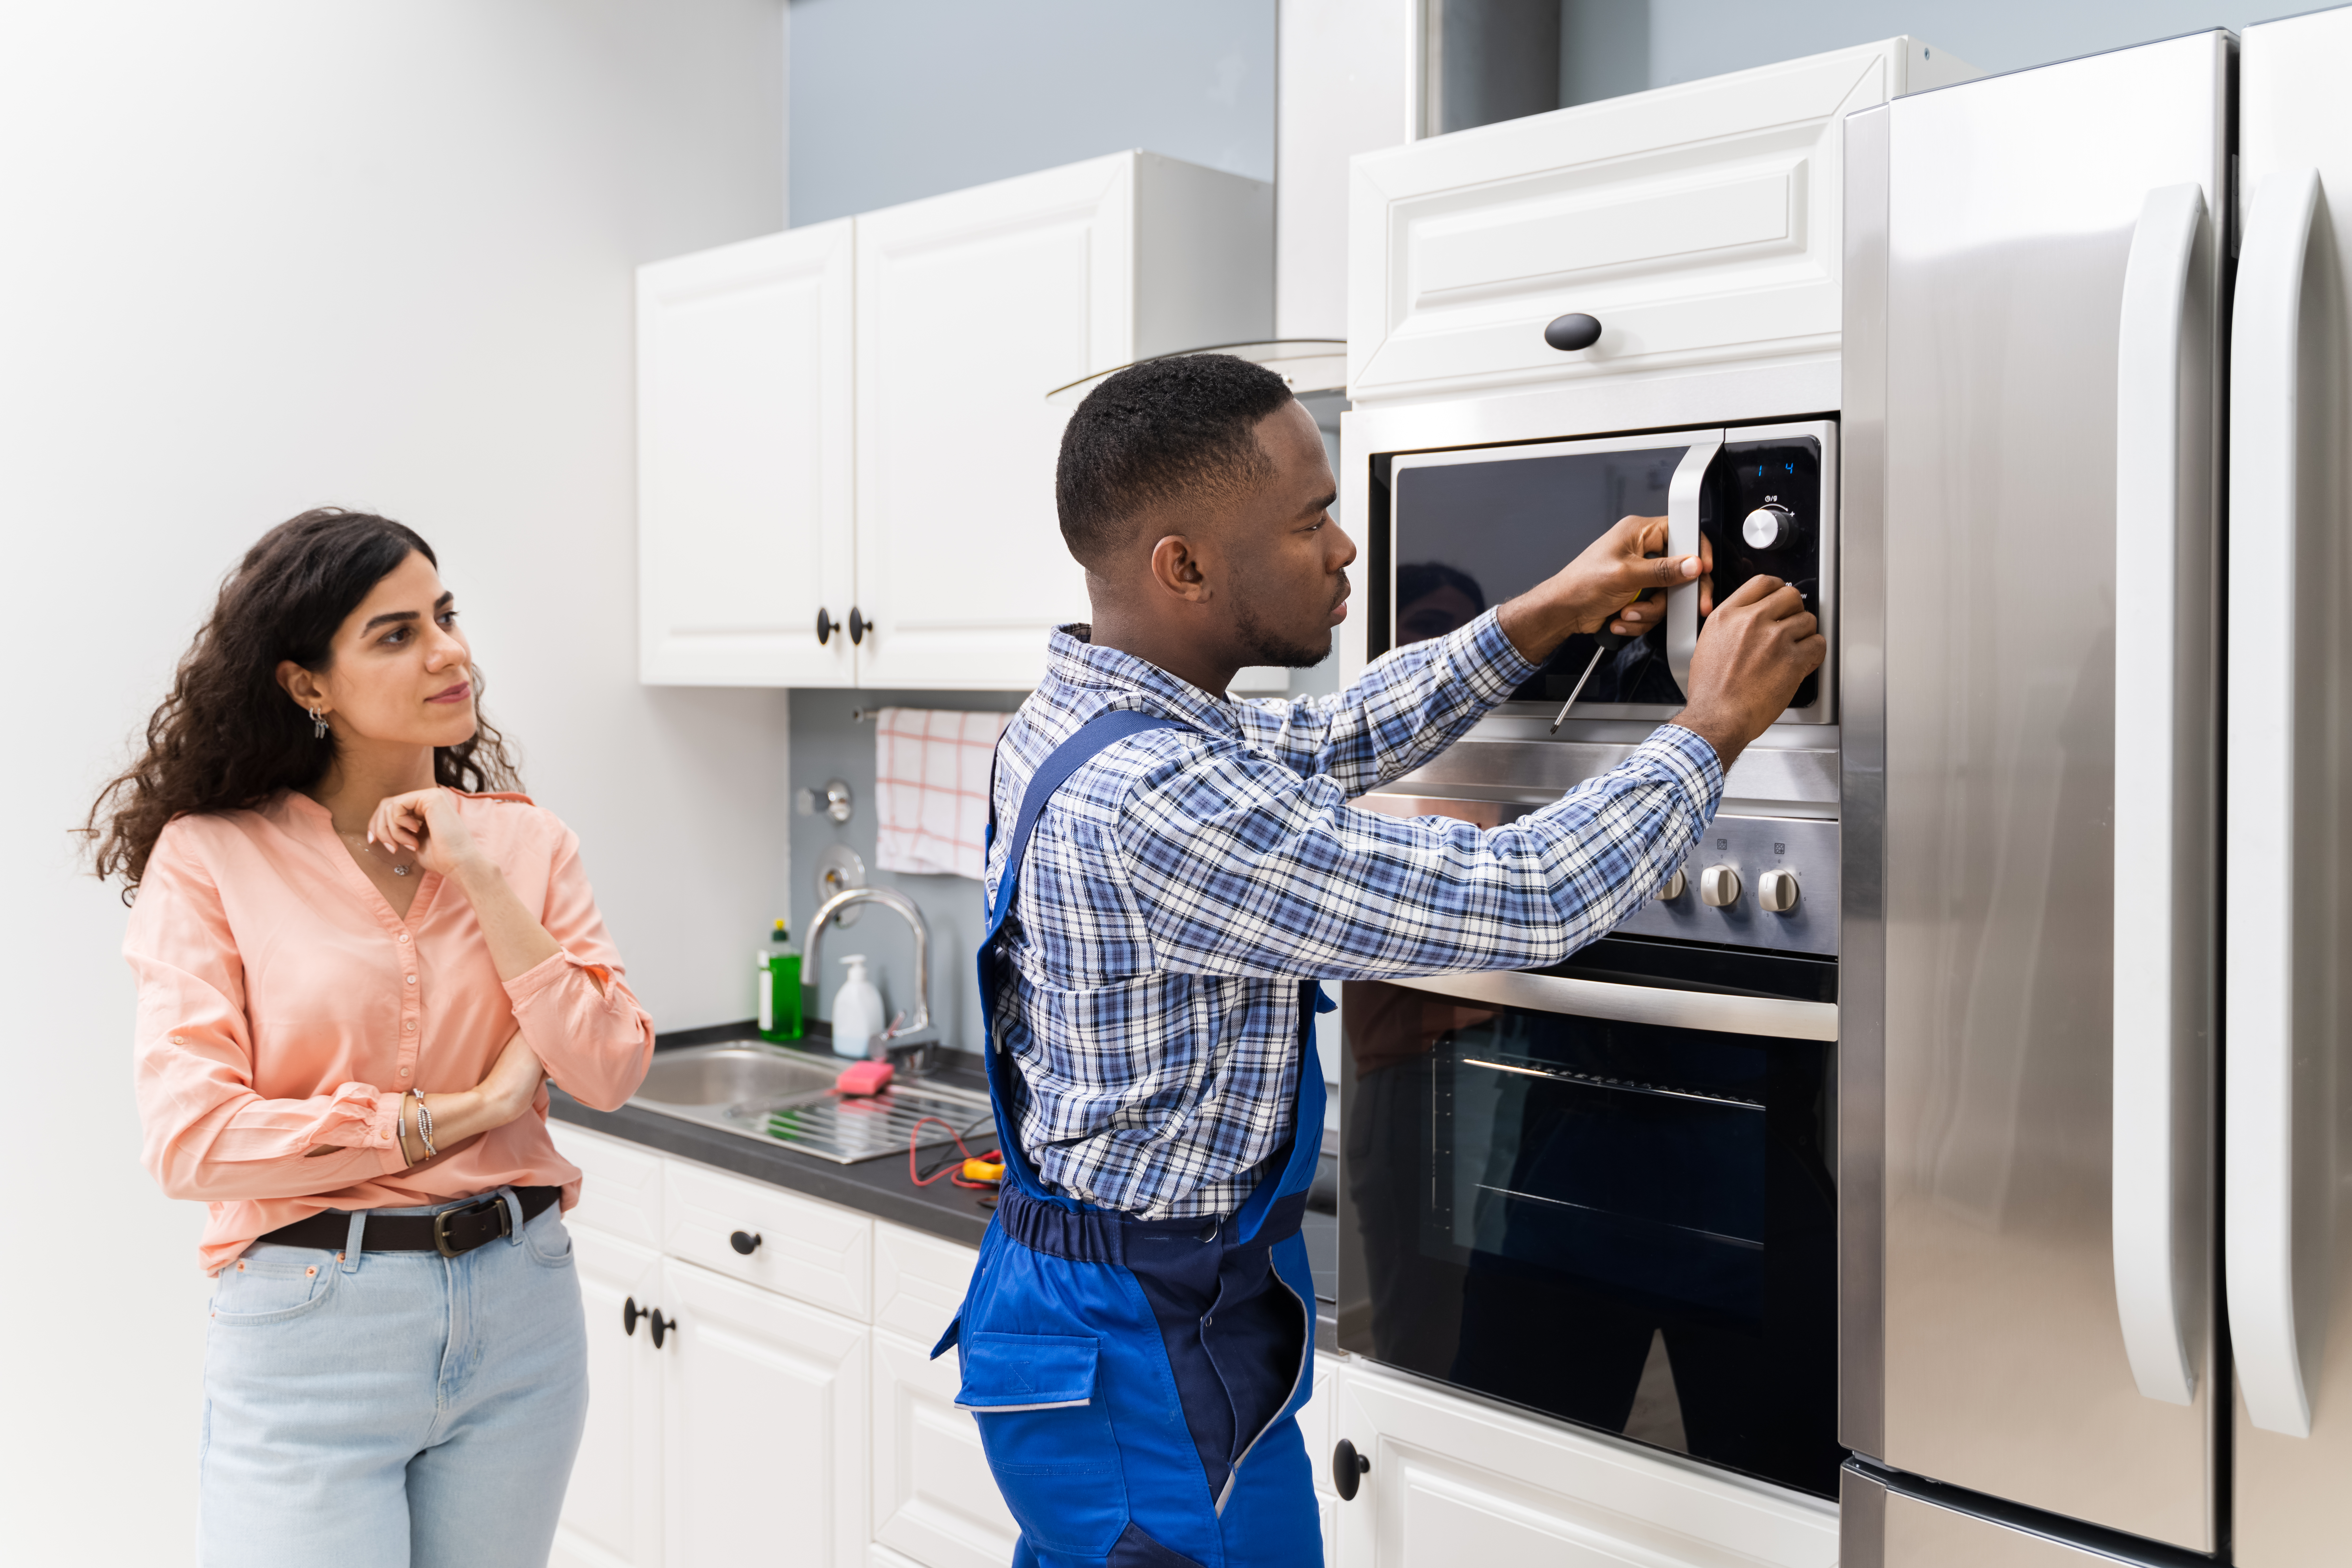 Man repairing a microwave while a woman looks on